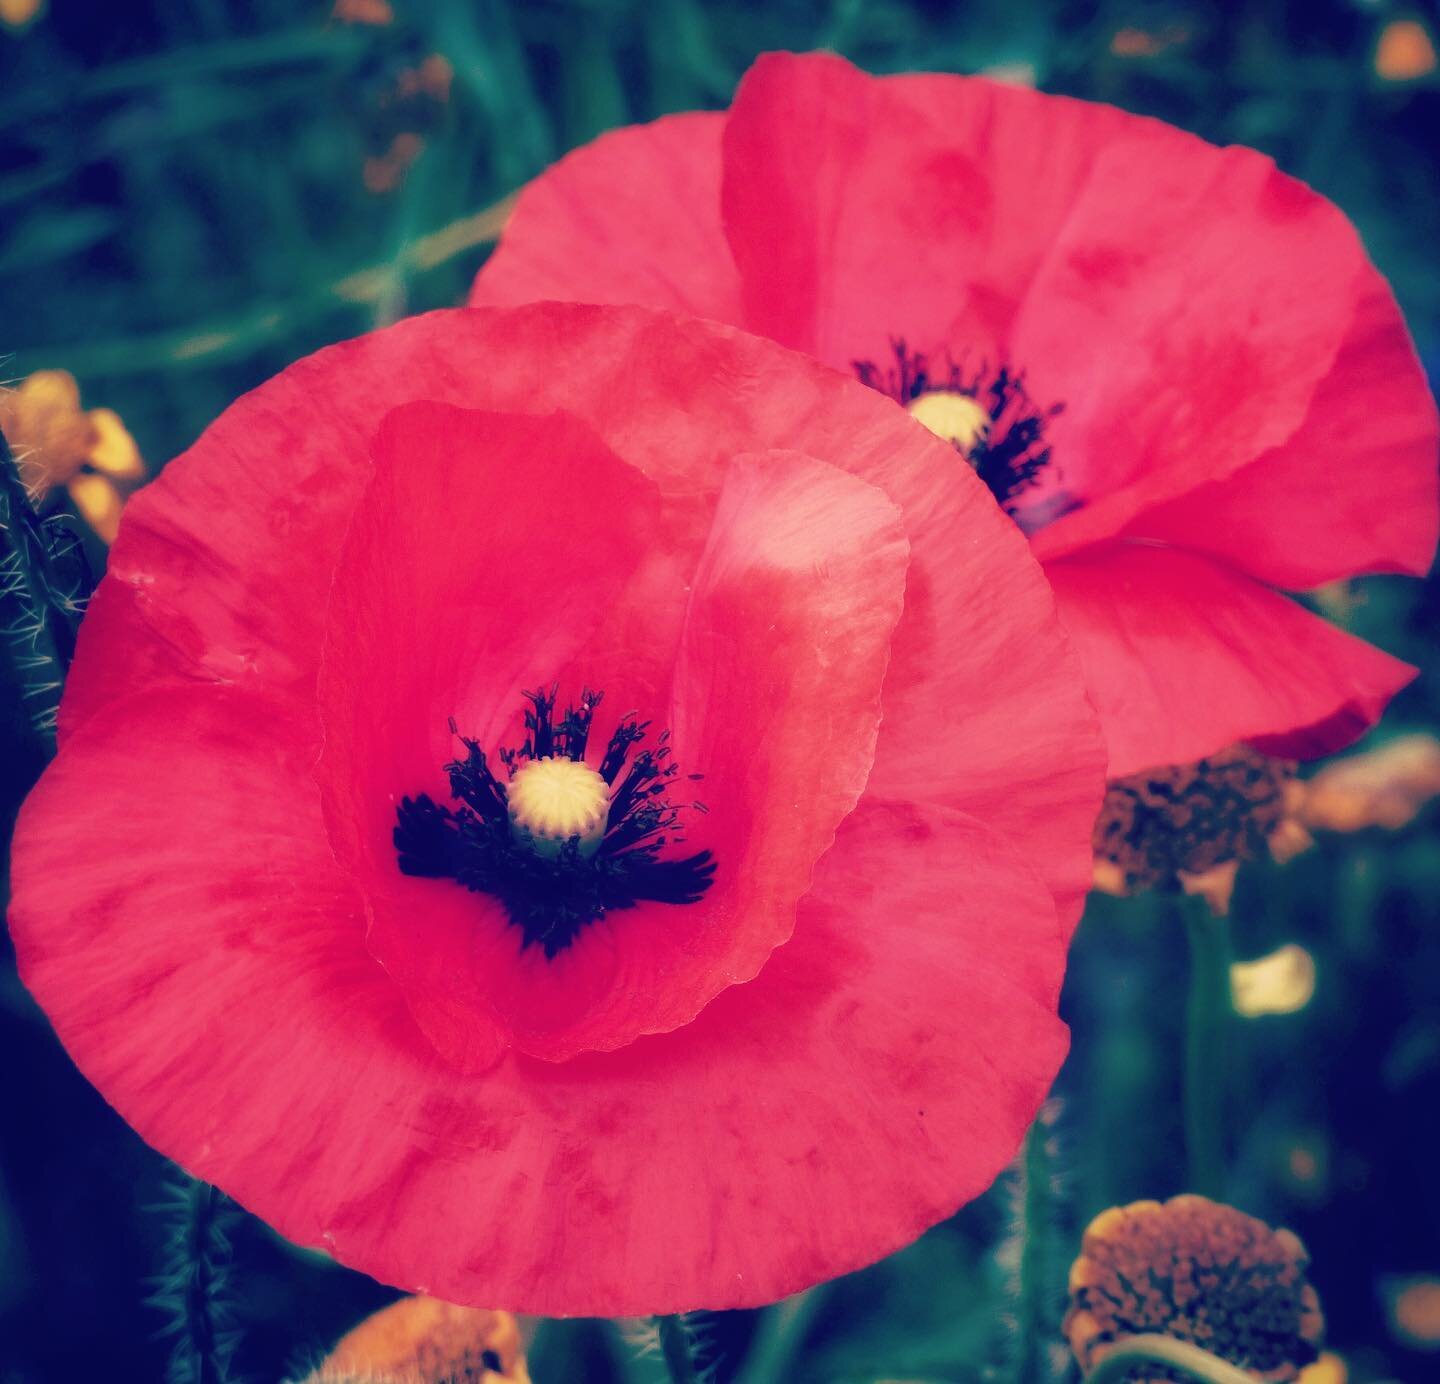 🌺 Lest we forget

Remembering those that gave their today for our future, thank you 

#poppy #remembranceday #remembrancesunday @royalbritishlegion